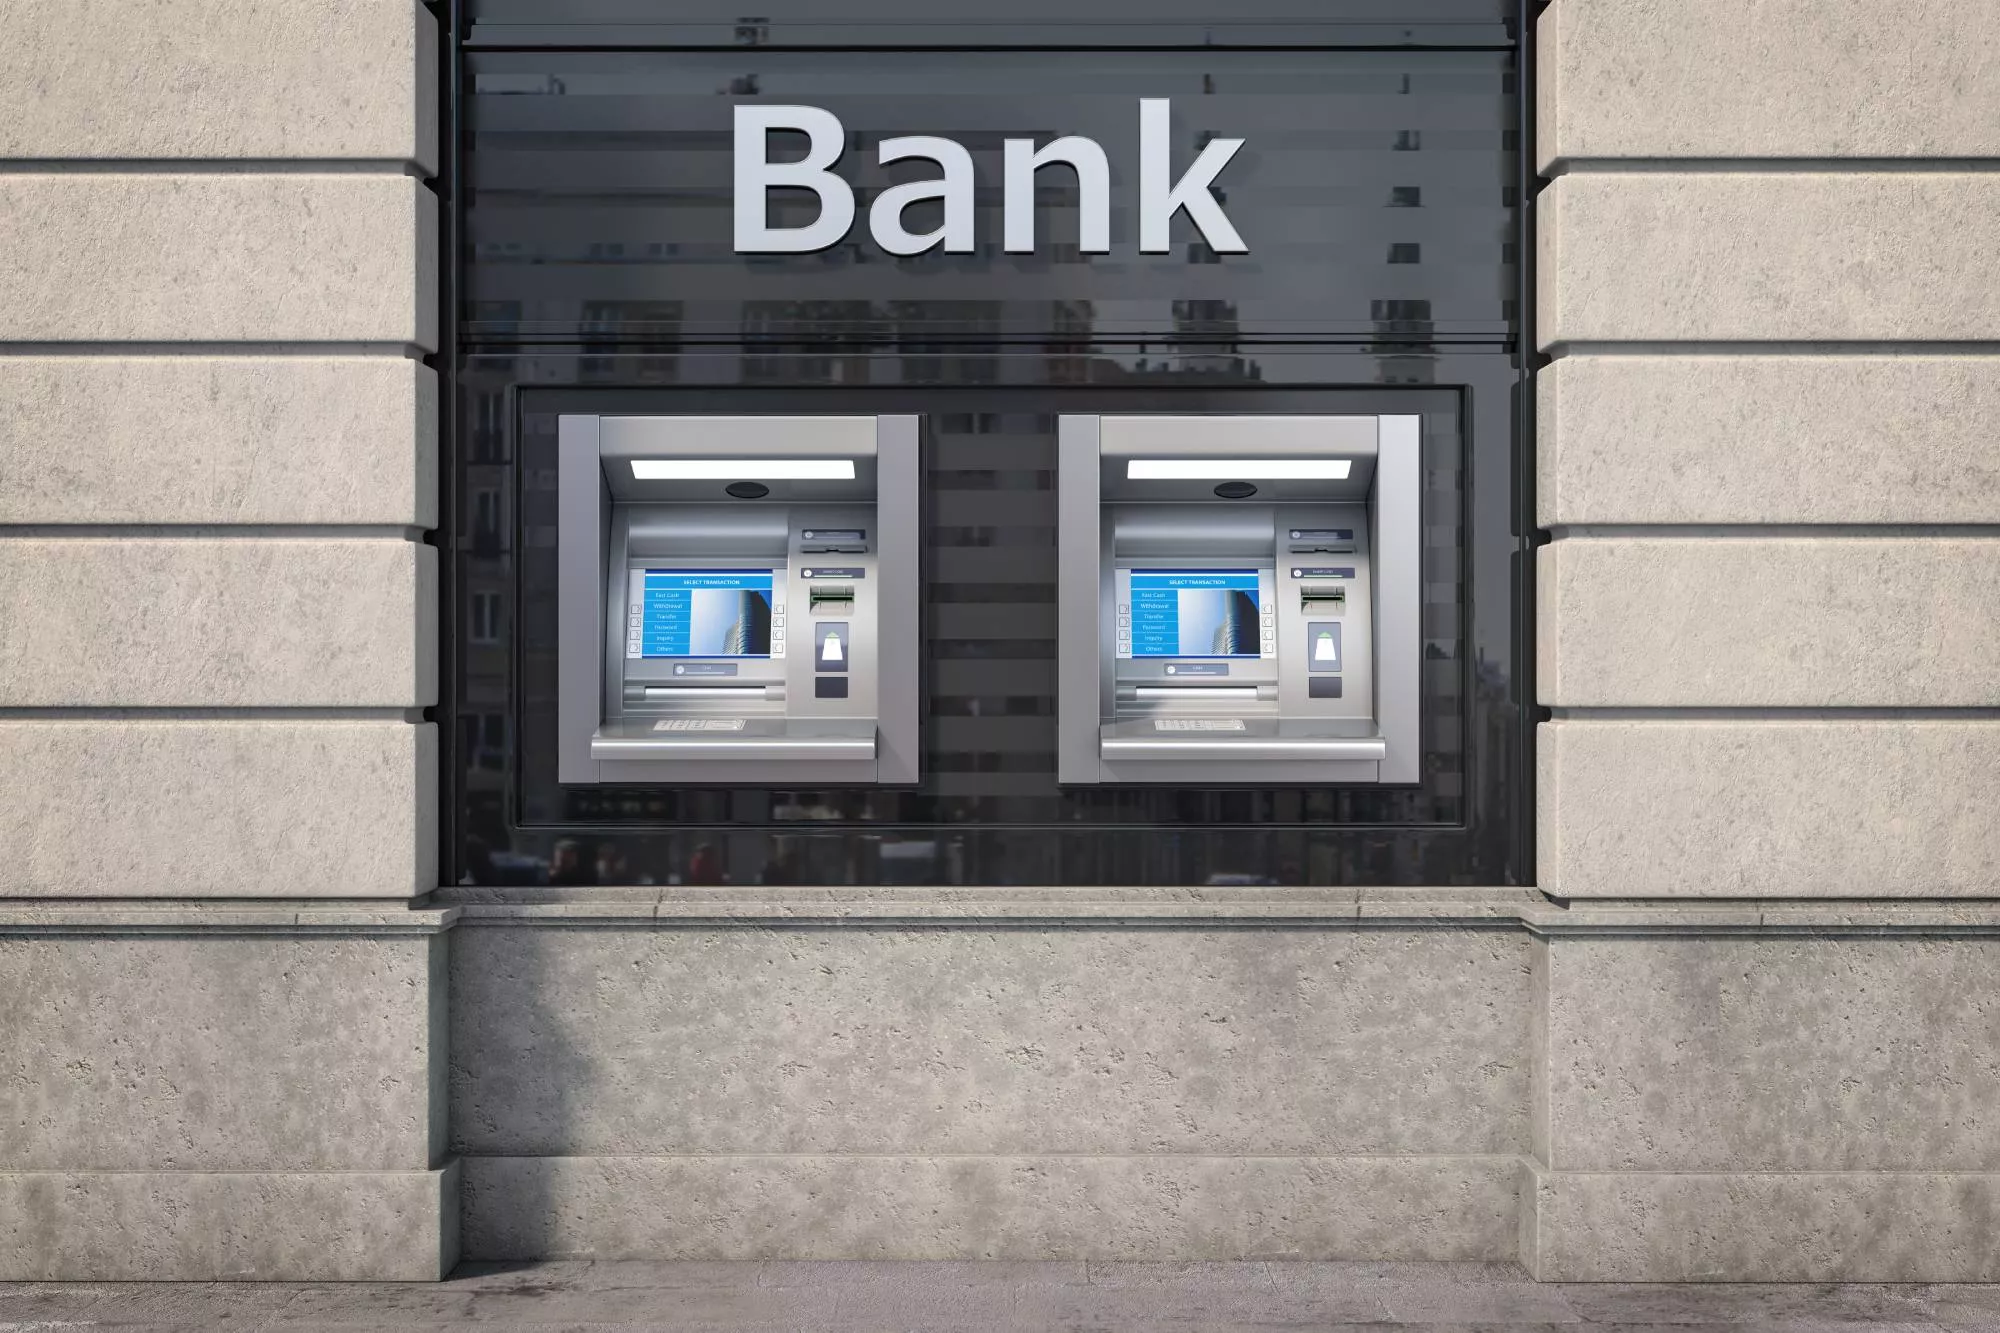 brick-and-mortar bank with two ATM machines for acquiring bank vs issuing bank